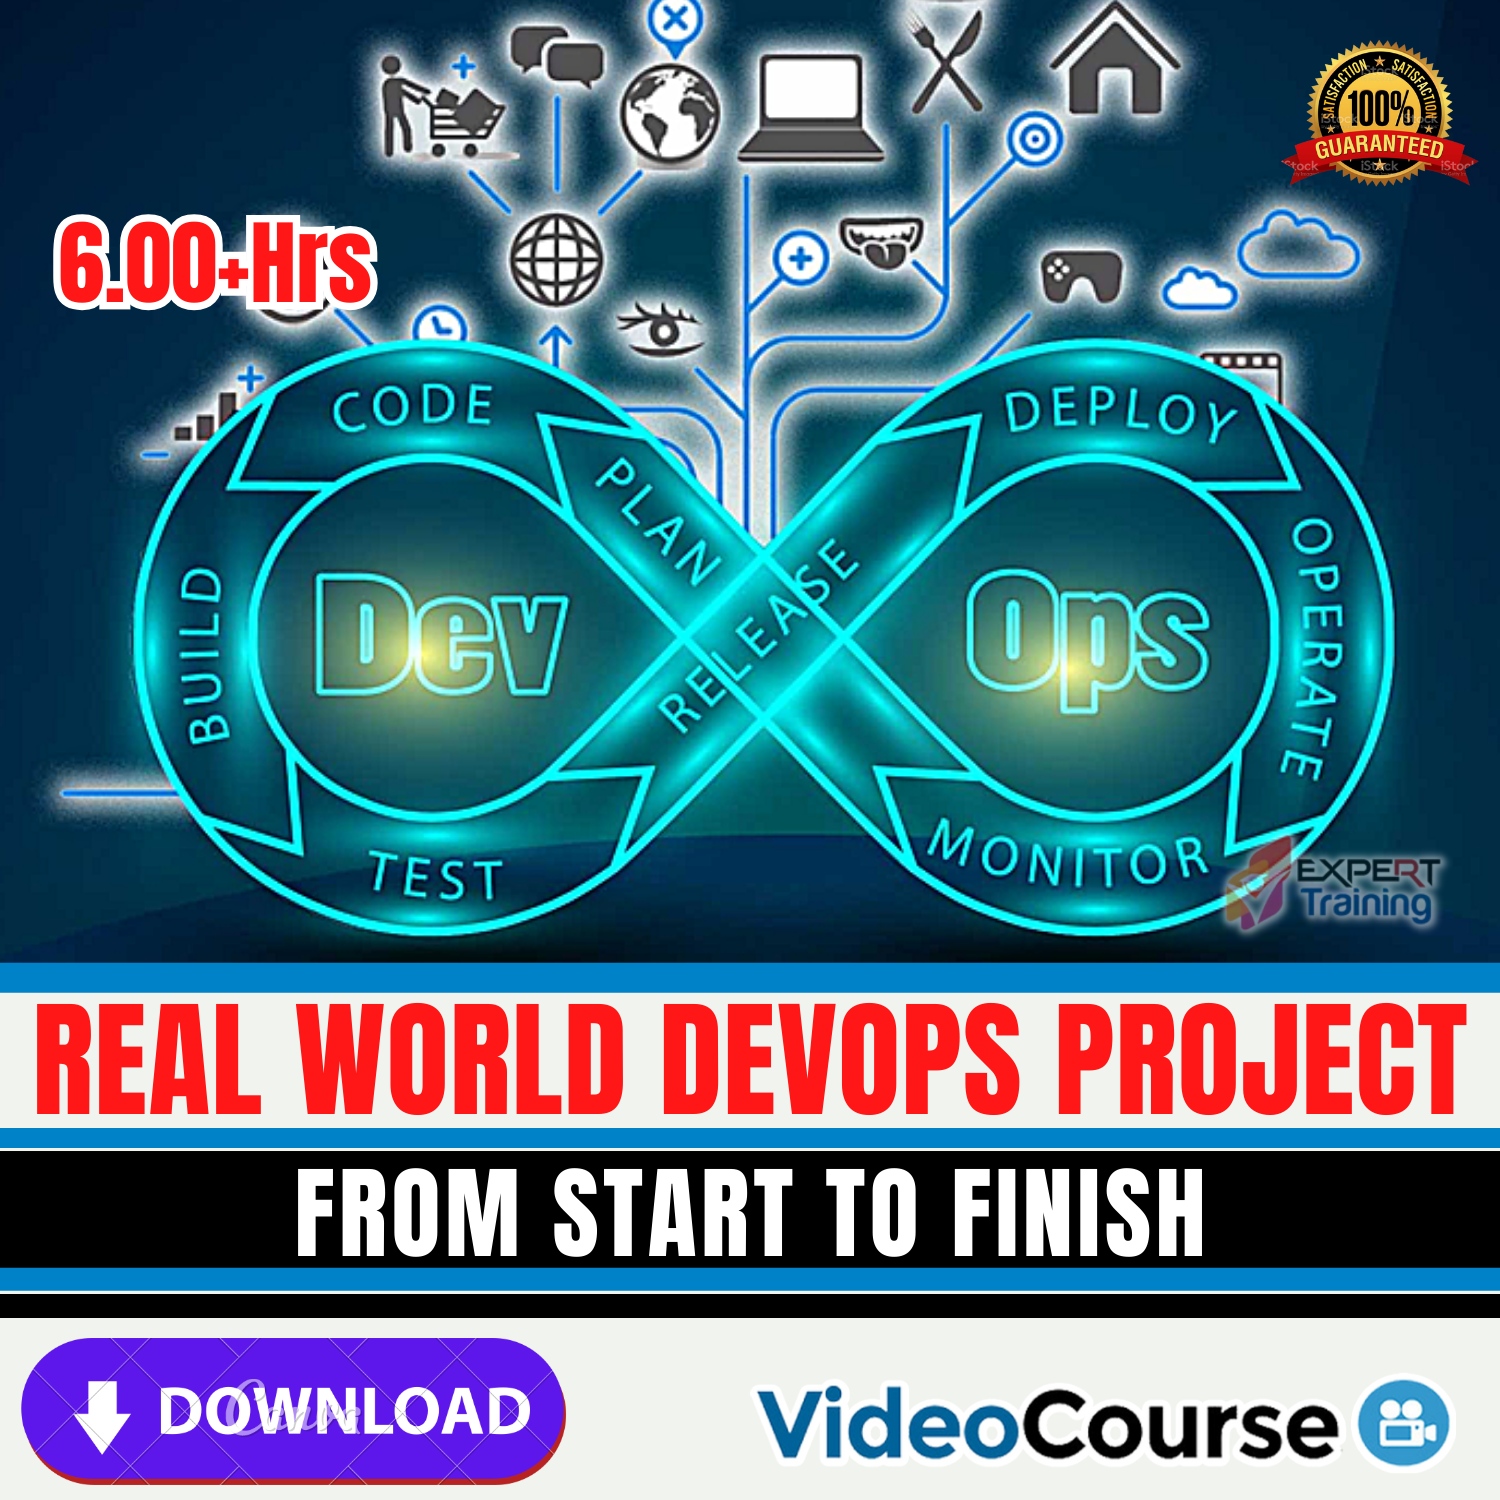 Real World DevOps Project from Start to Finish